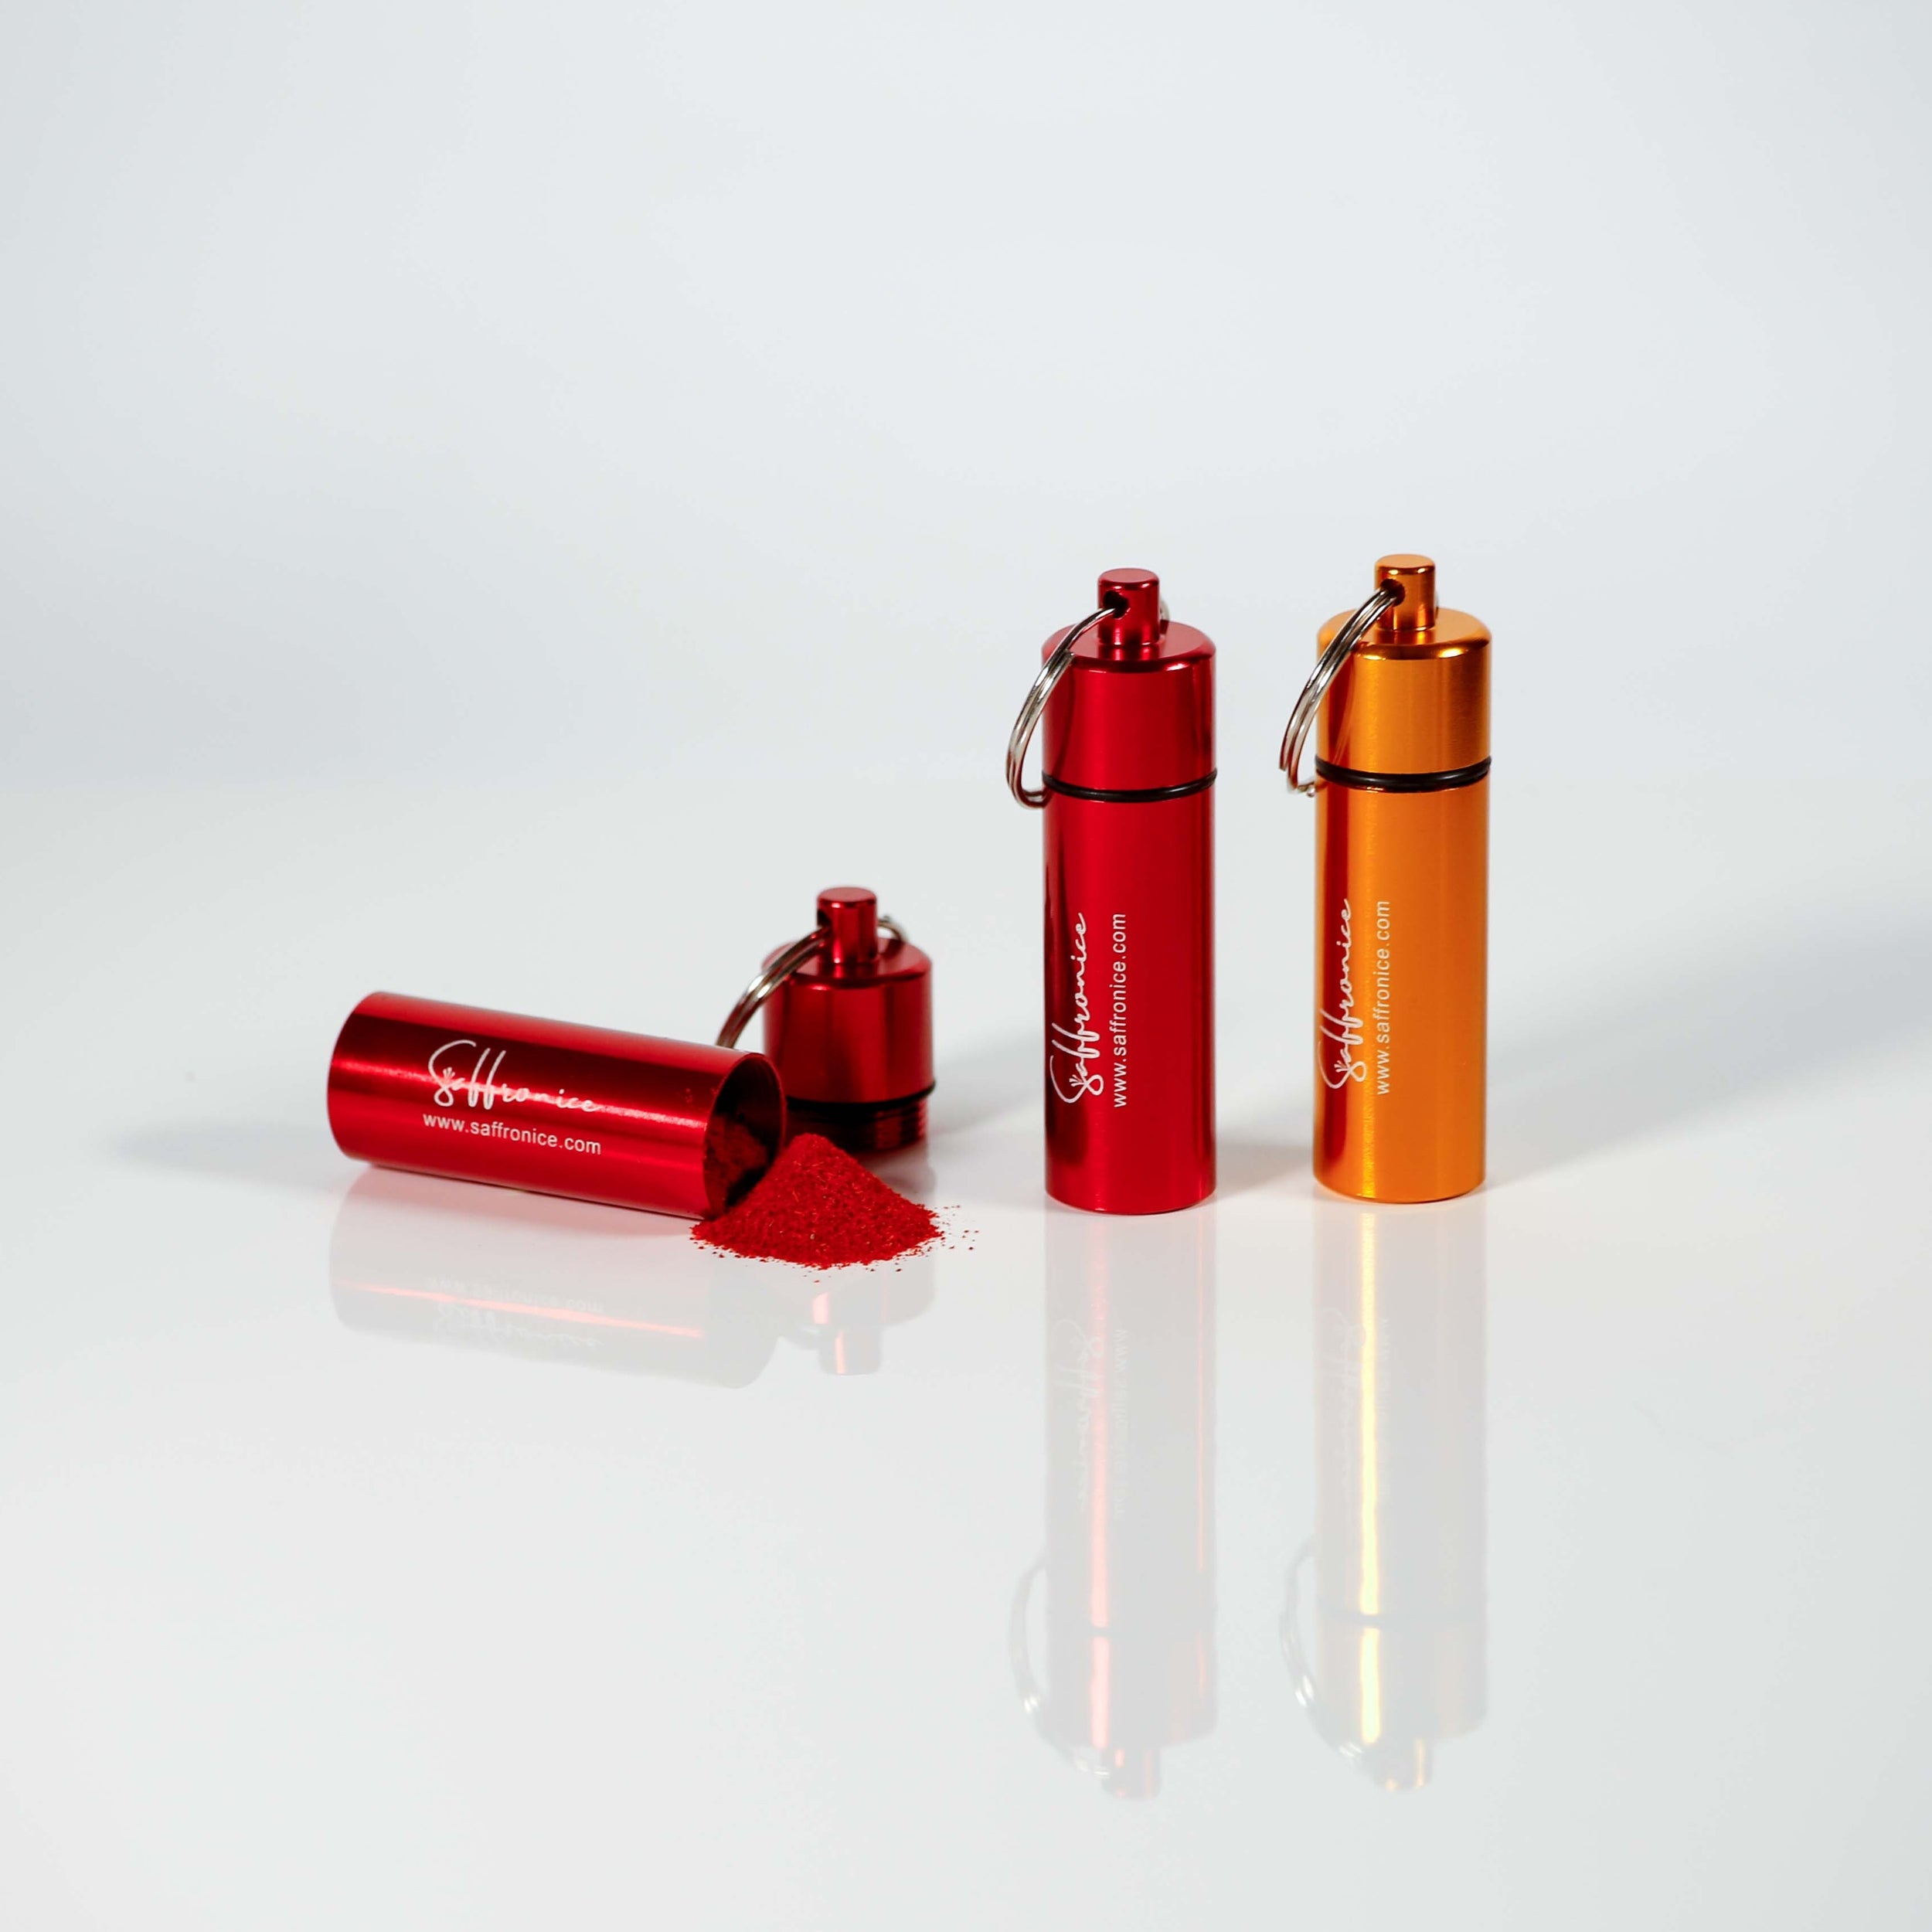 Gold and red cylinder for saffron powder